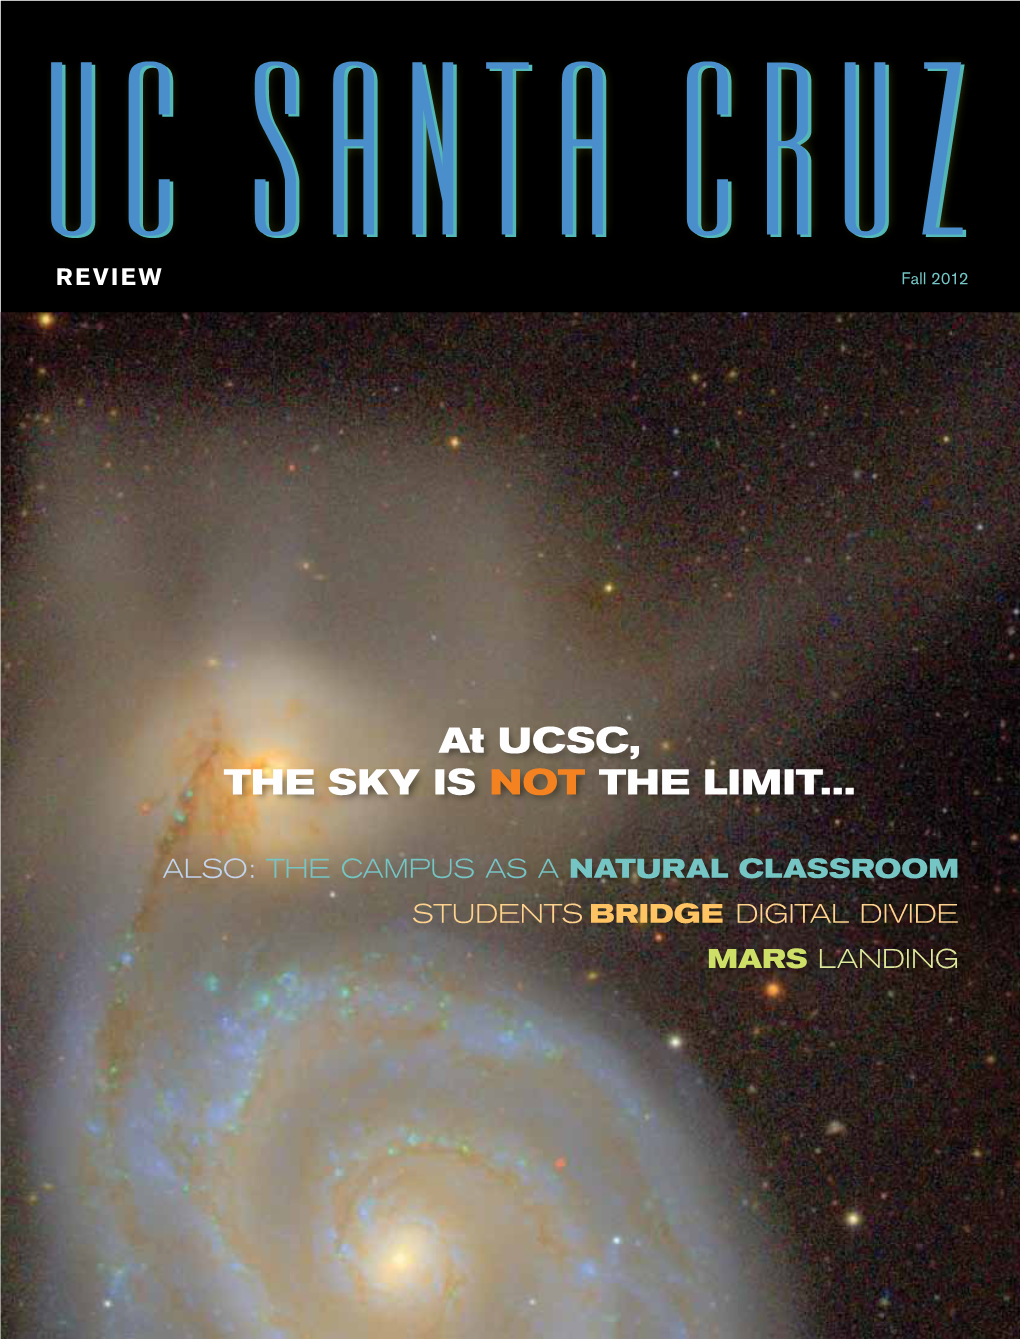 At UCSC, the SKY IS NOT the LIMIT